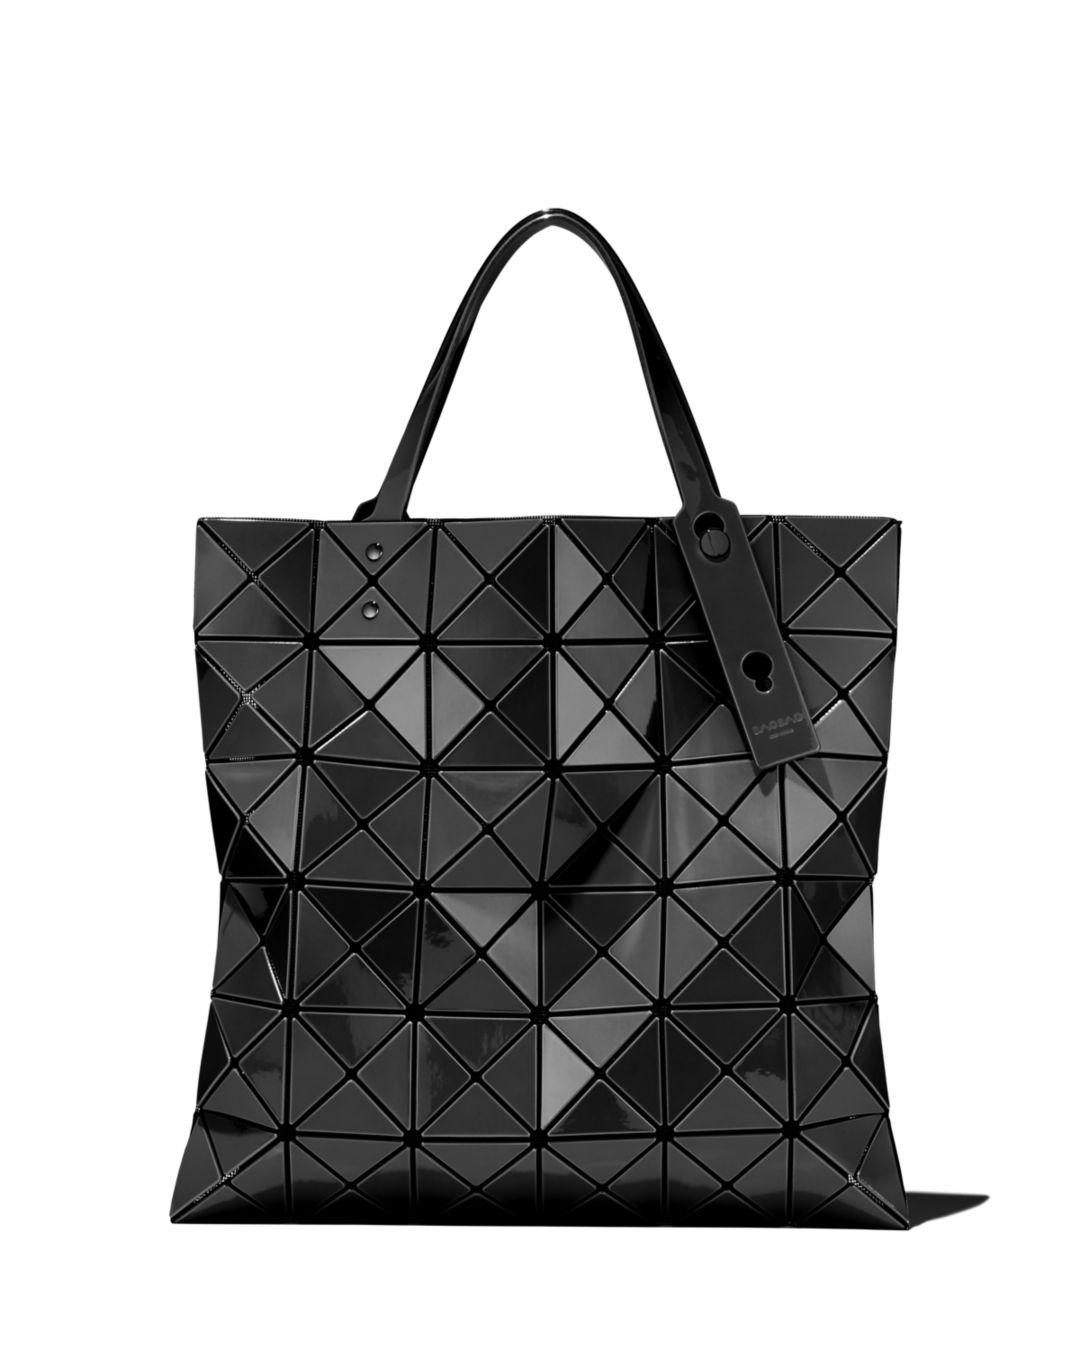 Lyst - Bao Bao Issey Miyake Lucent Tote in Black